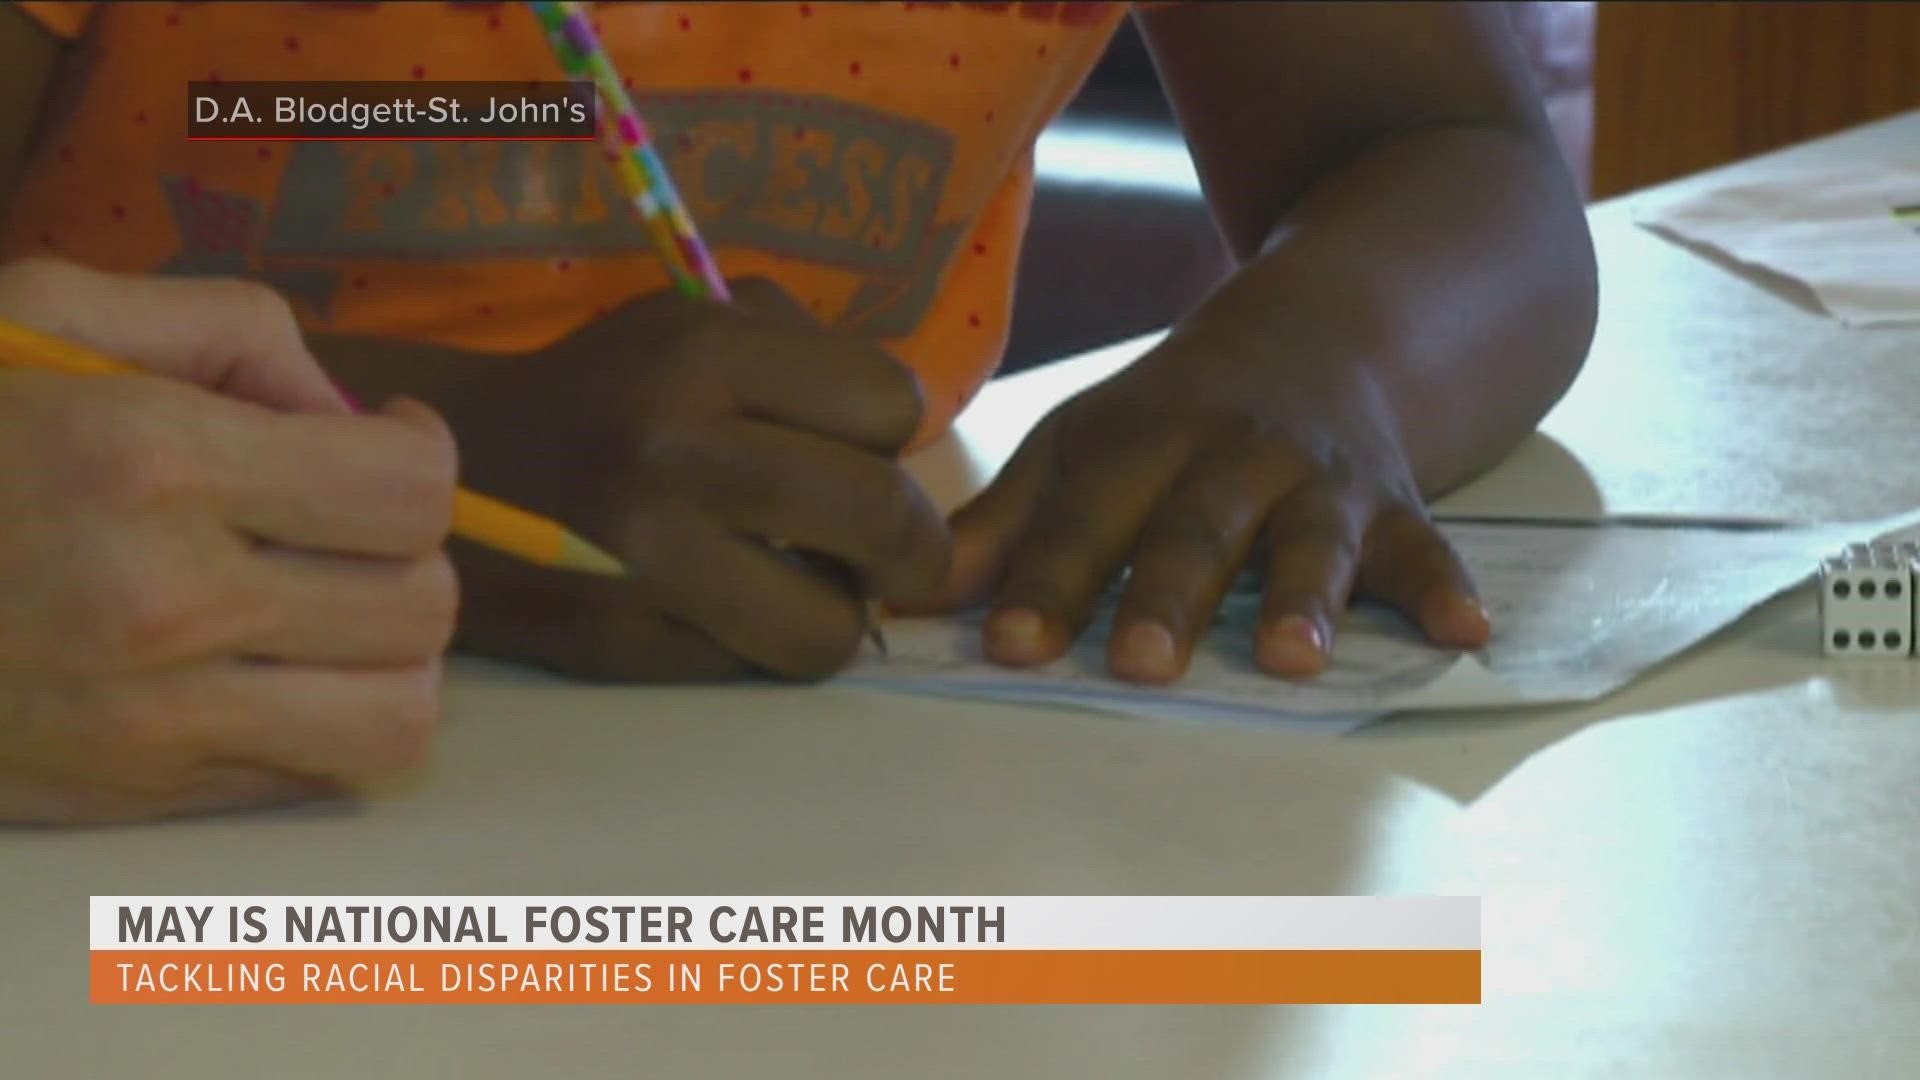 Samaritas will host a town hall to discuss both the importance of foster care and the racial disparities impacting children in Michigan's foster care system.